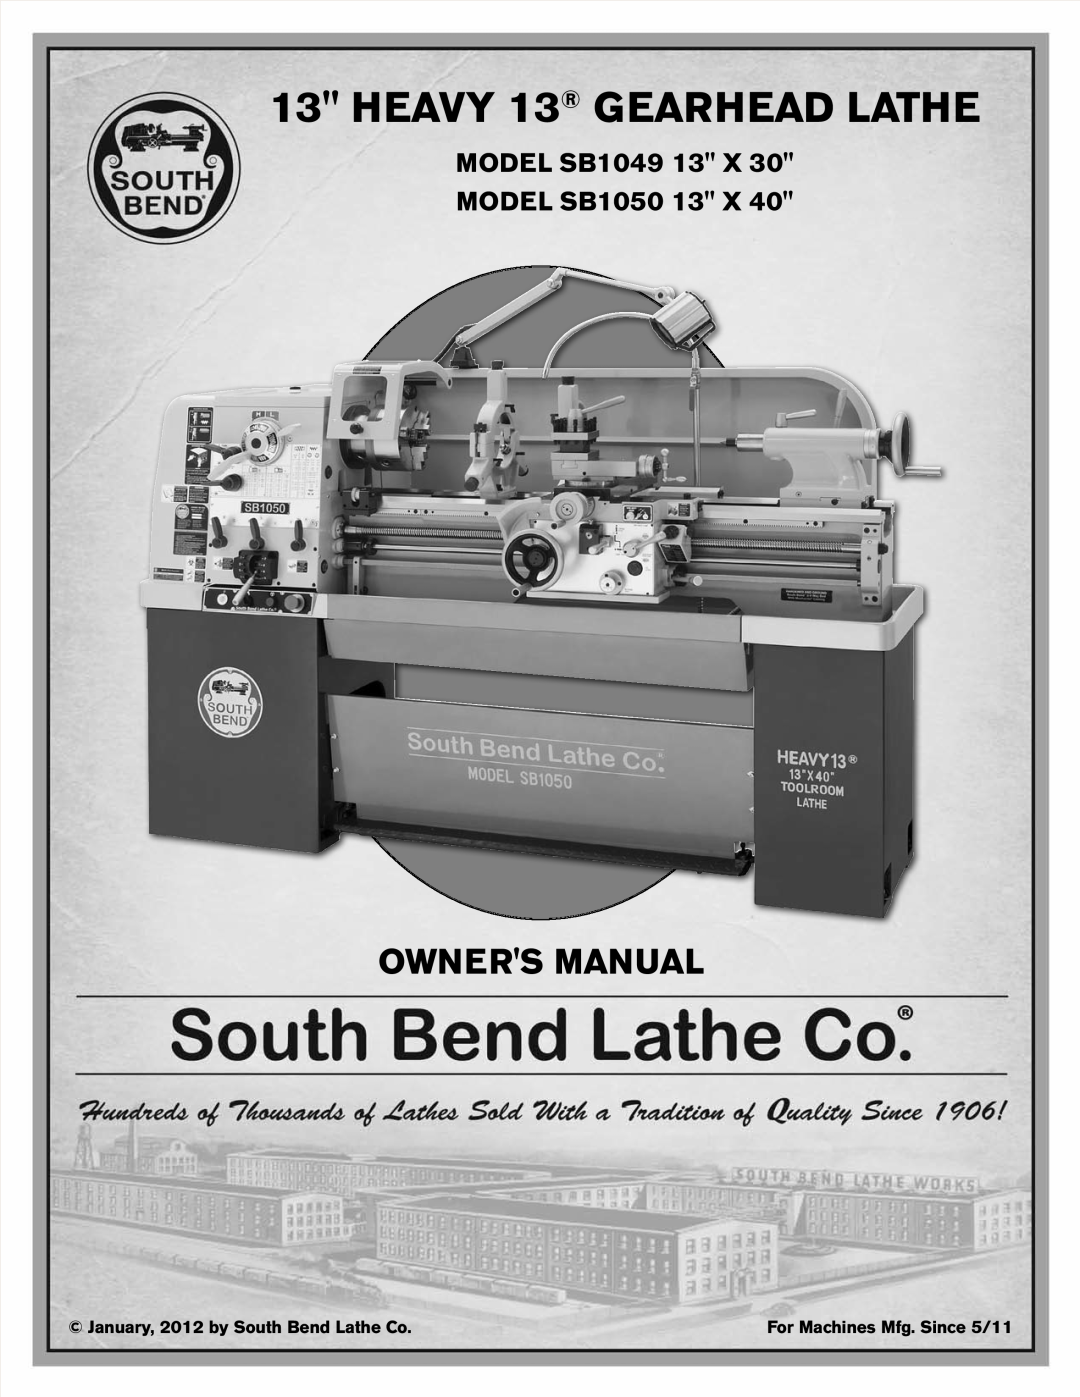 Southbend owner manual HEAVY 13 GEARHEAD LATHE, MODEL SB1049 13 X MODEL SB1050 13 X, For Machines Mfg. Since 5/11 